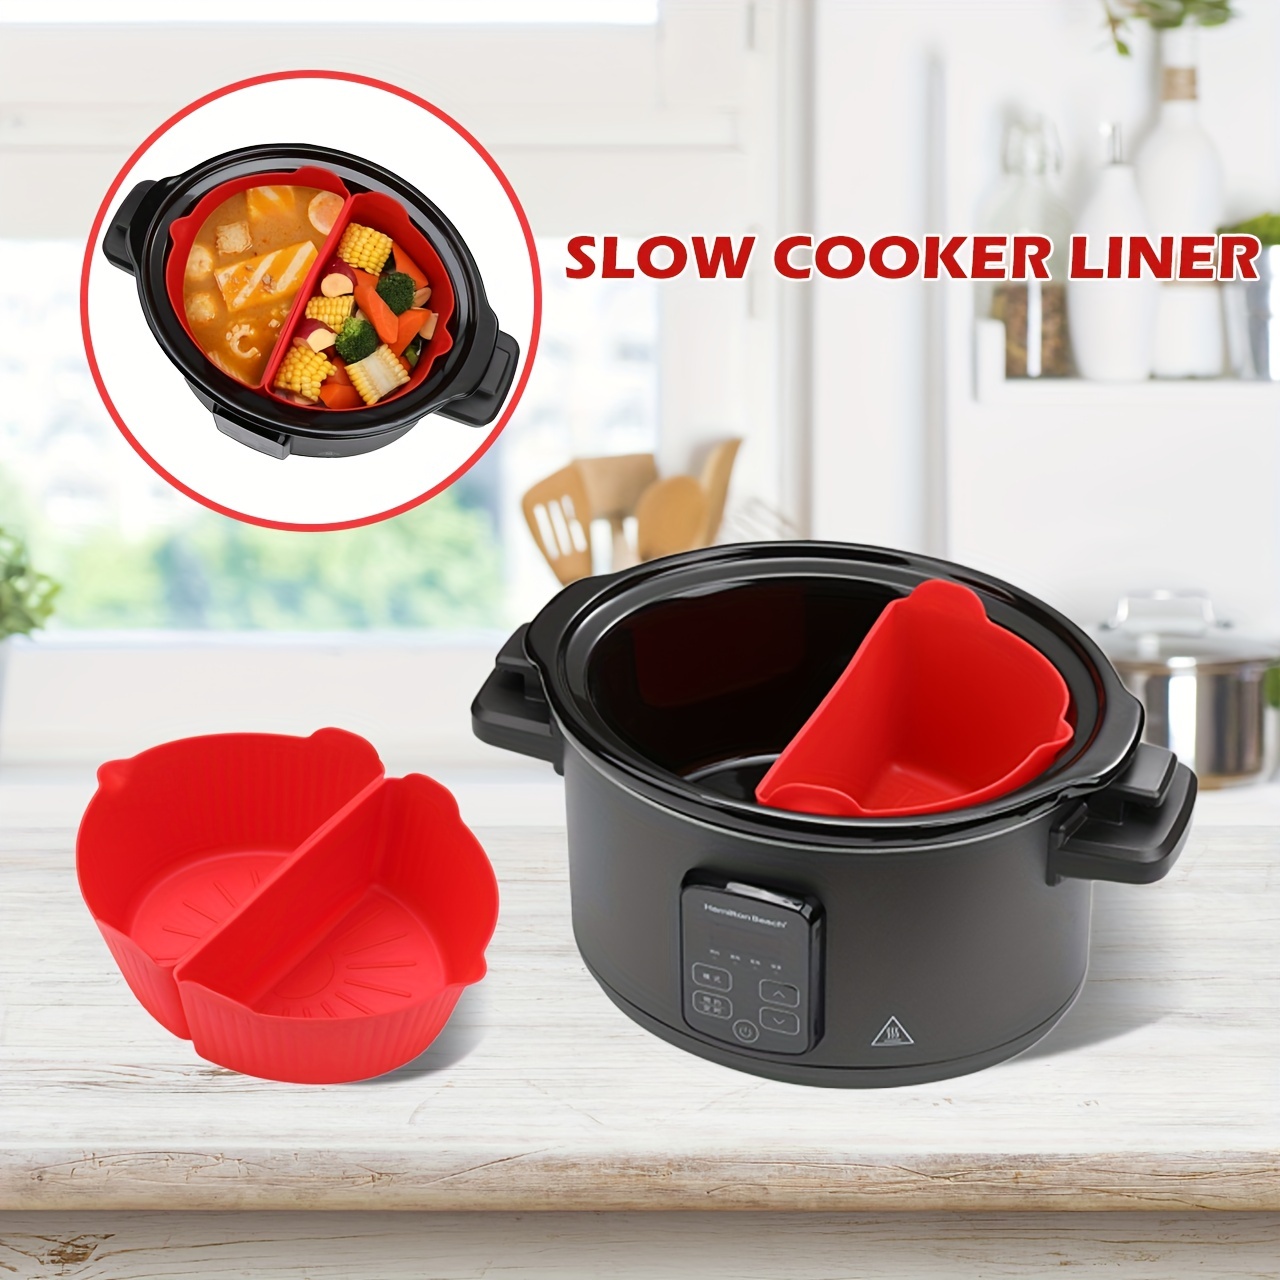 Yous Auto Slow Cooker Liners - Reusable Crock Pot Divider,Safe Silicone Cooking Bags Fit 6-8 Quarts Oval or Round Pot Dishwasher Safe Cooking Liner